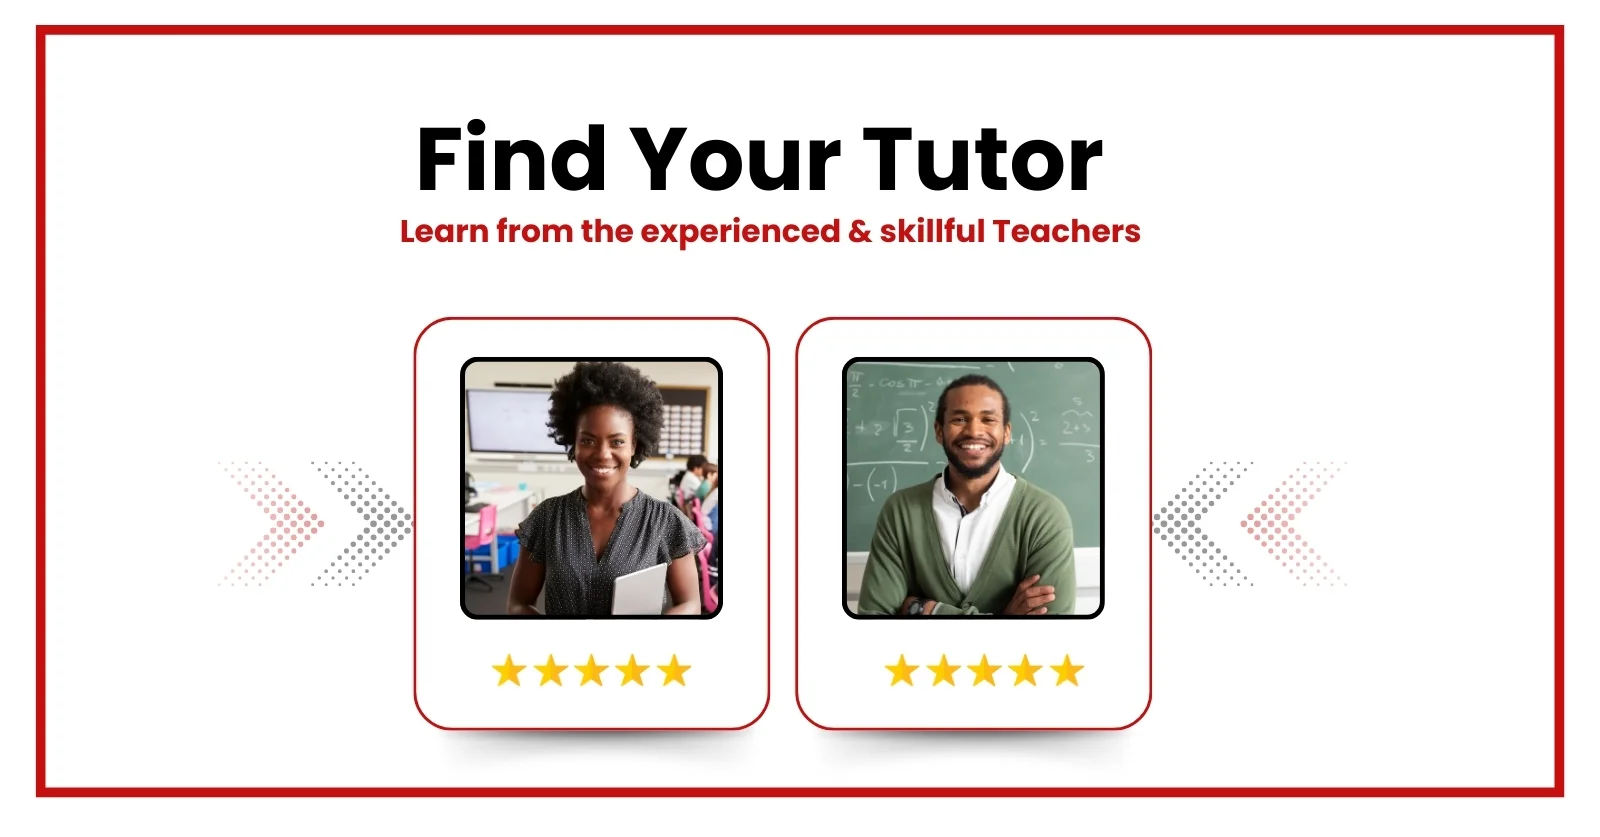 Find Your Tutor